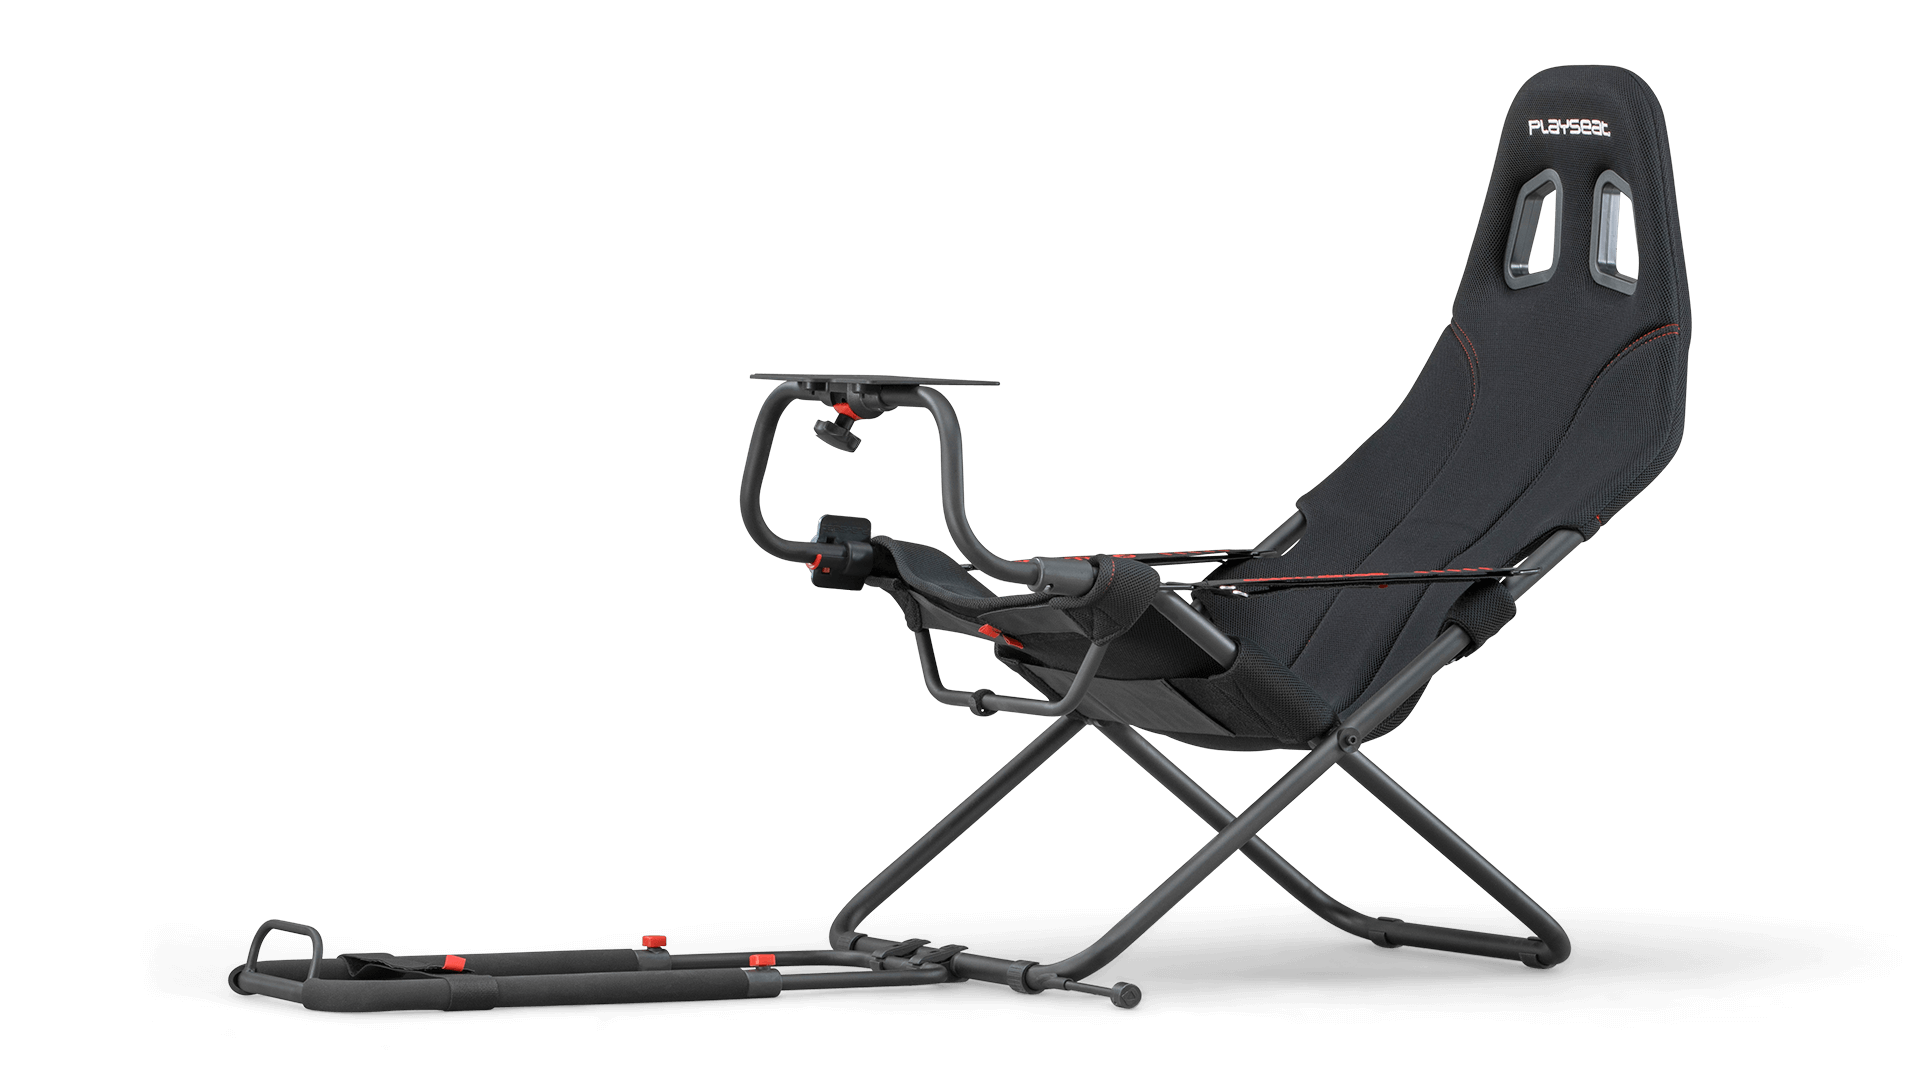 playseat-challenge-black-actifit-racing-seat-front-angle-view-1920x1080-1.png